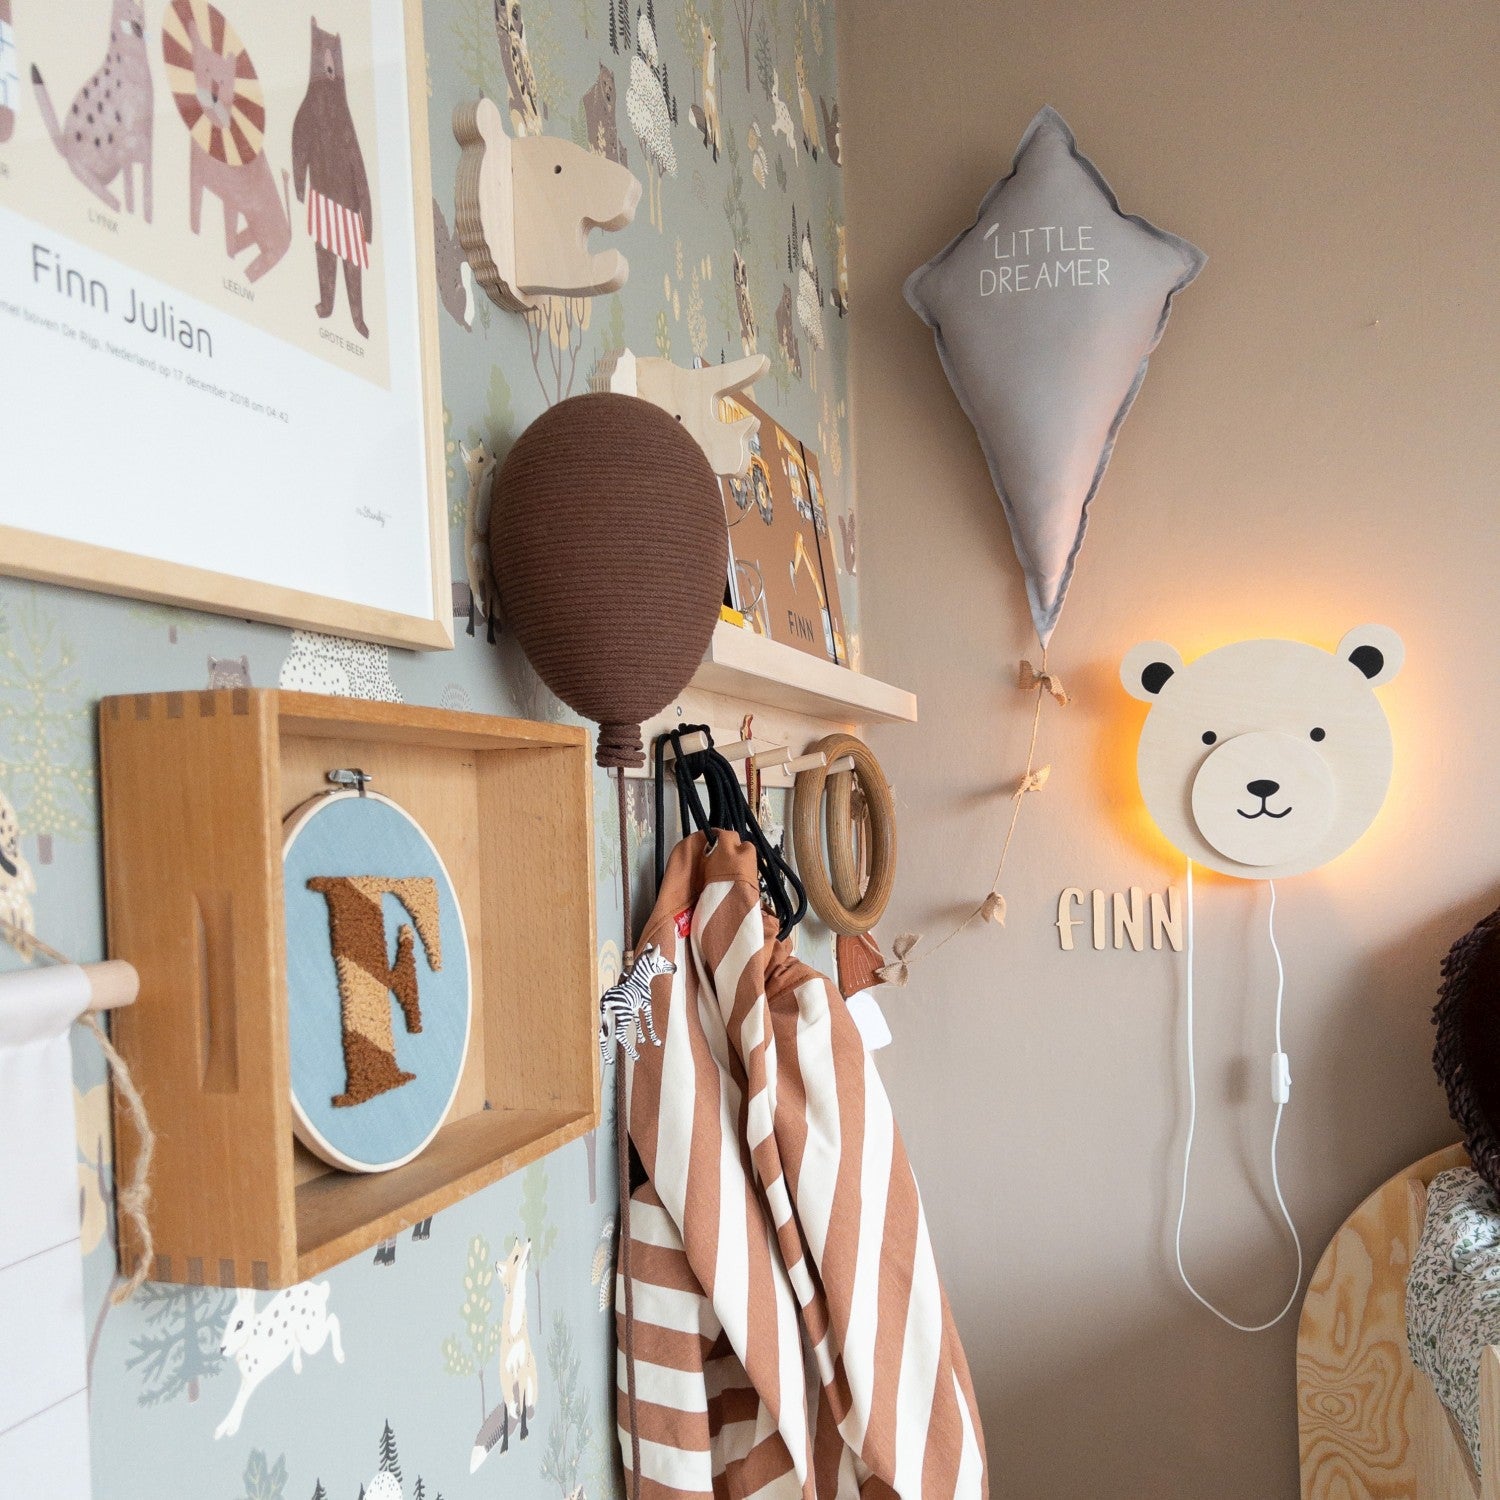 Wooden children’s room wall lamp | Teddy, plywood - toddie.com